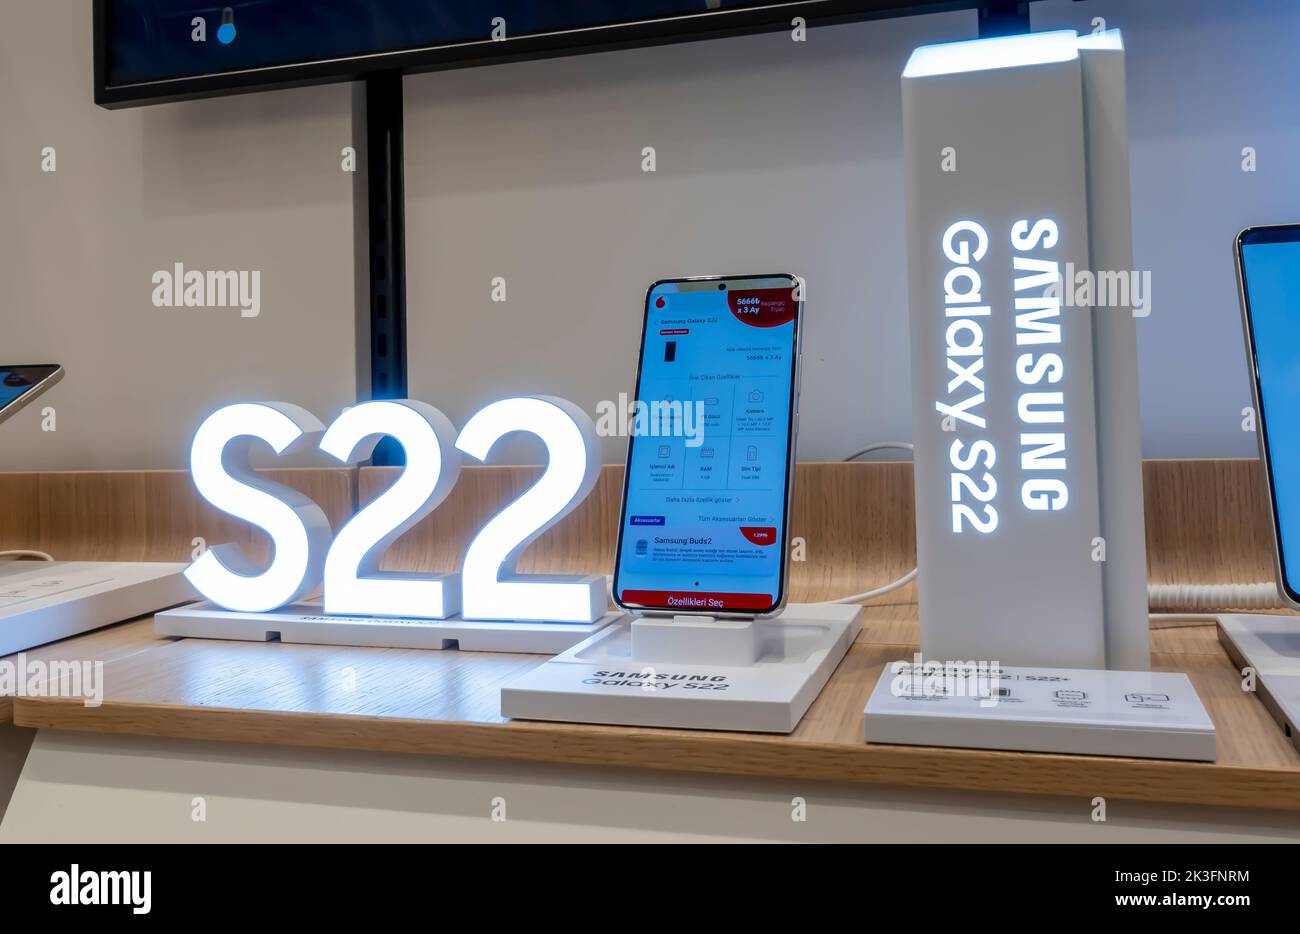 New Samsung Galaxy S22 smartphone on display in a cell phone store Stock Photo